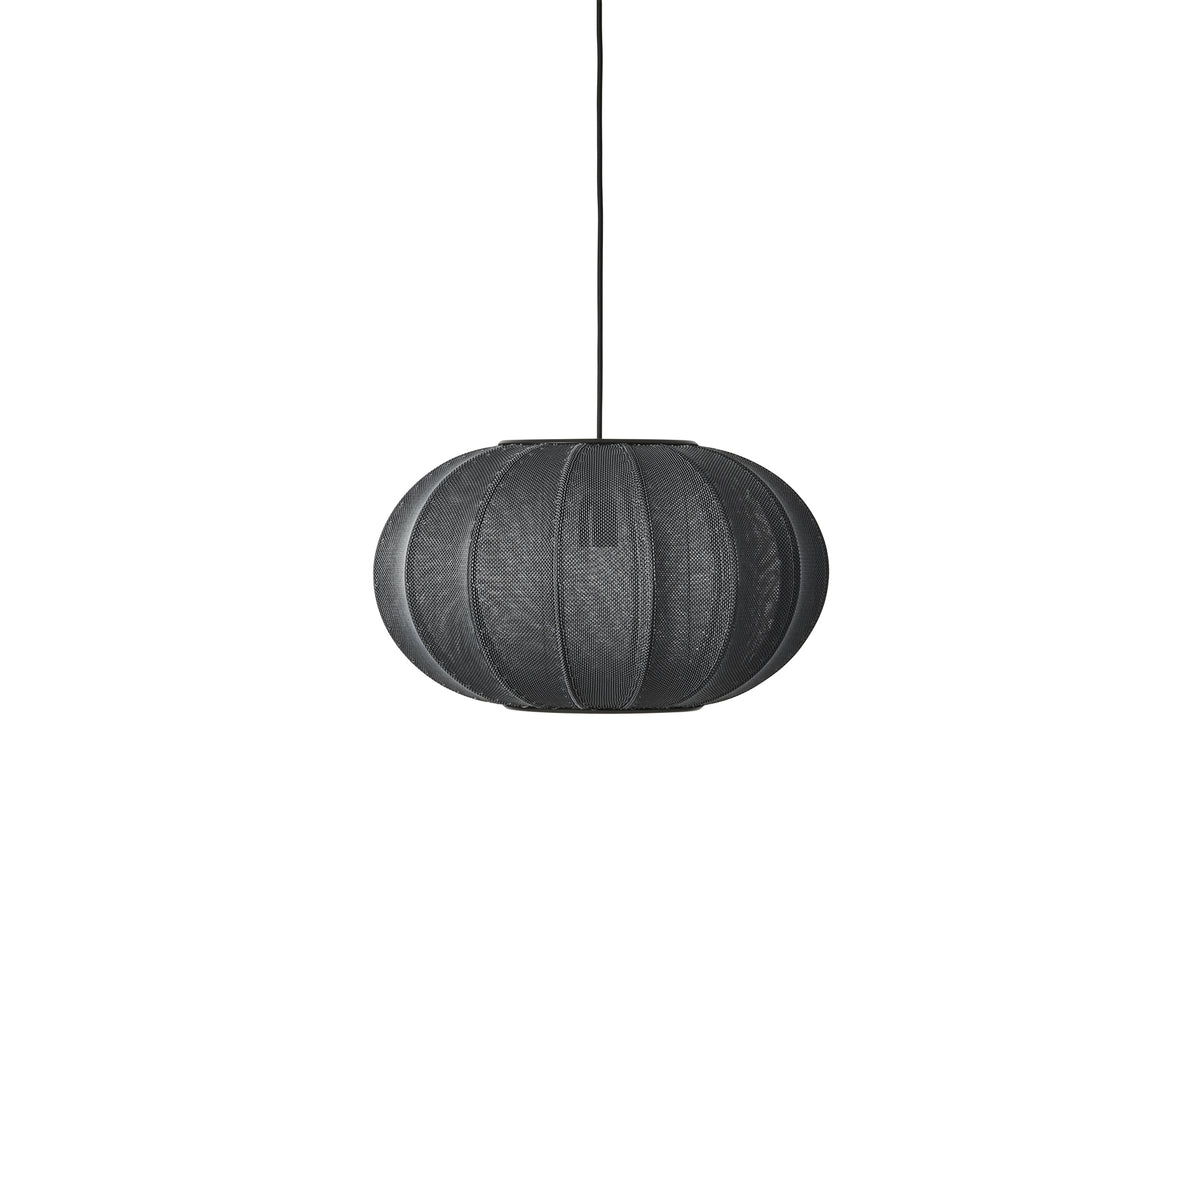 Made by Hand, Knit-Wit Oval Pendant Lamp 45, Blue Stone, Pendant, Iskos Berlin,